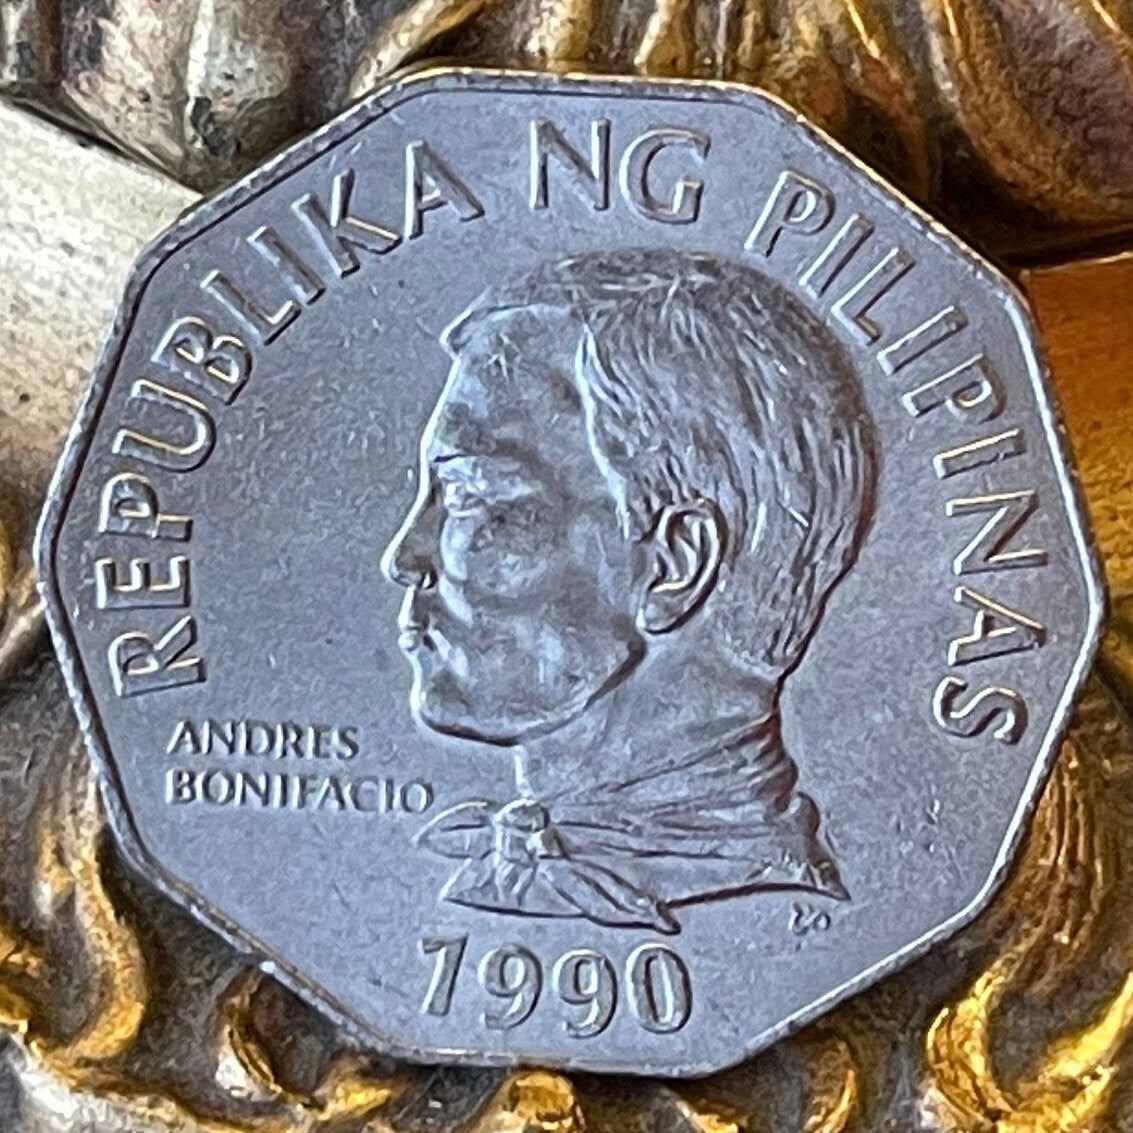 President Andrés Bonifacio & Coconut Palm 2 Piso Philippines Authentic Coin Money for Jewelry (Tree of Life) (Decagonal) (10-Sided) (Beach)